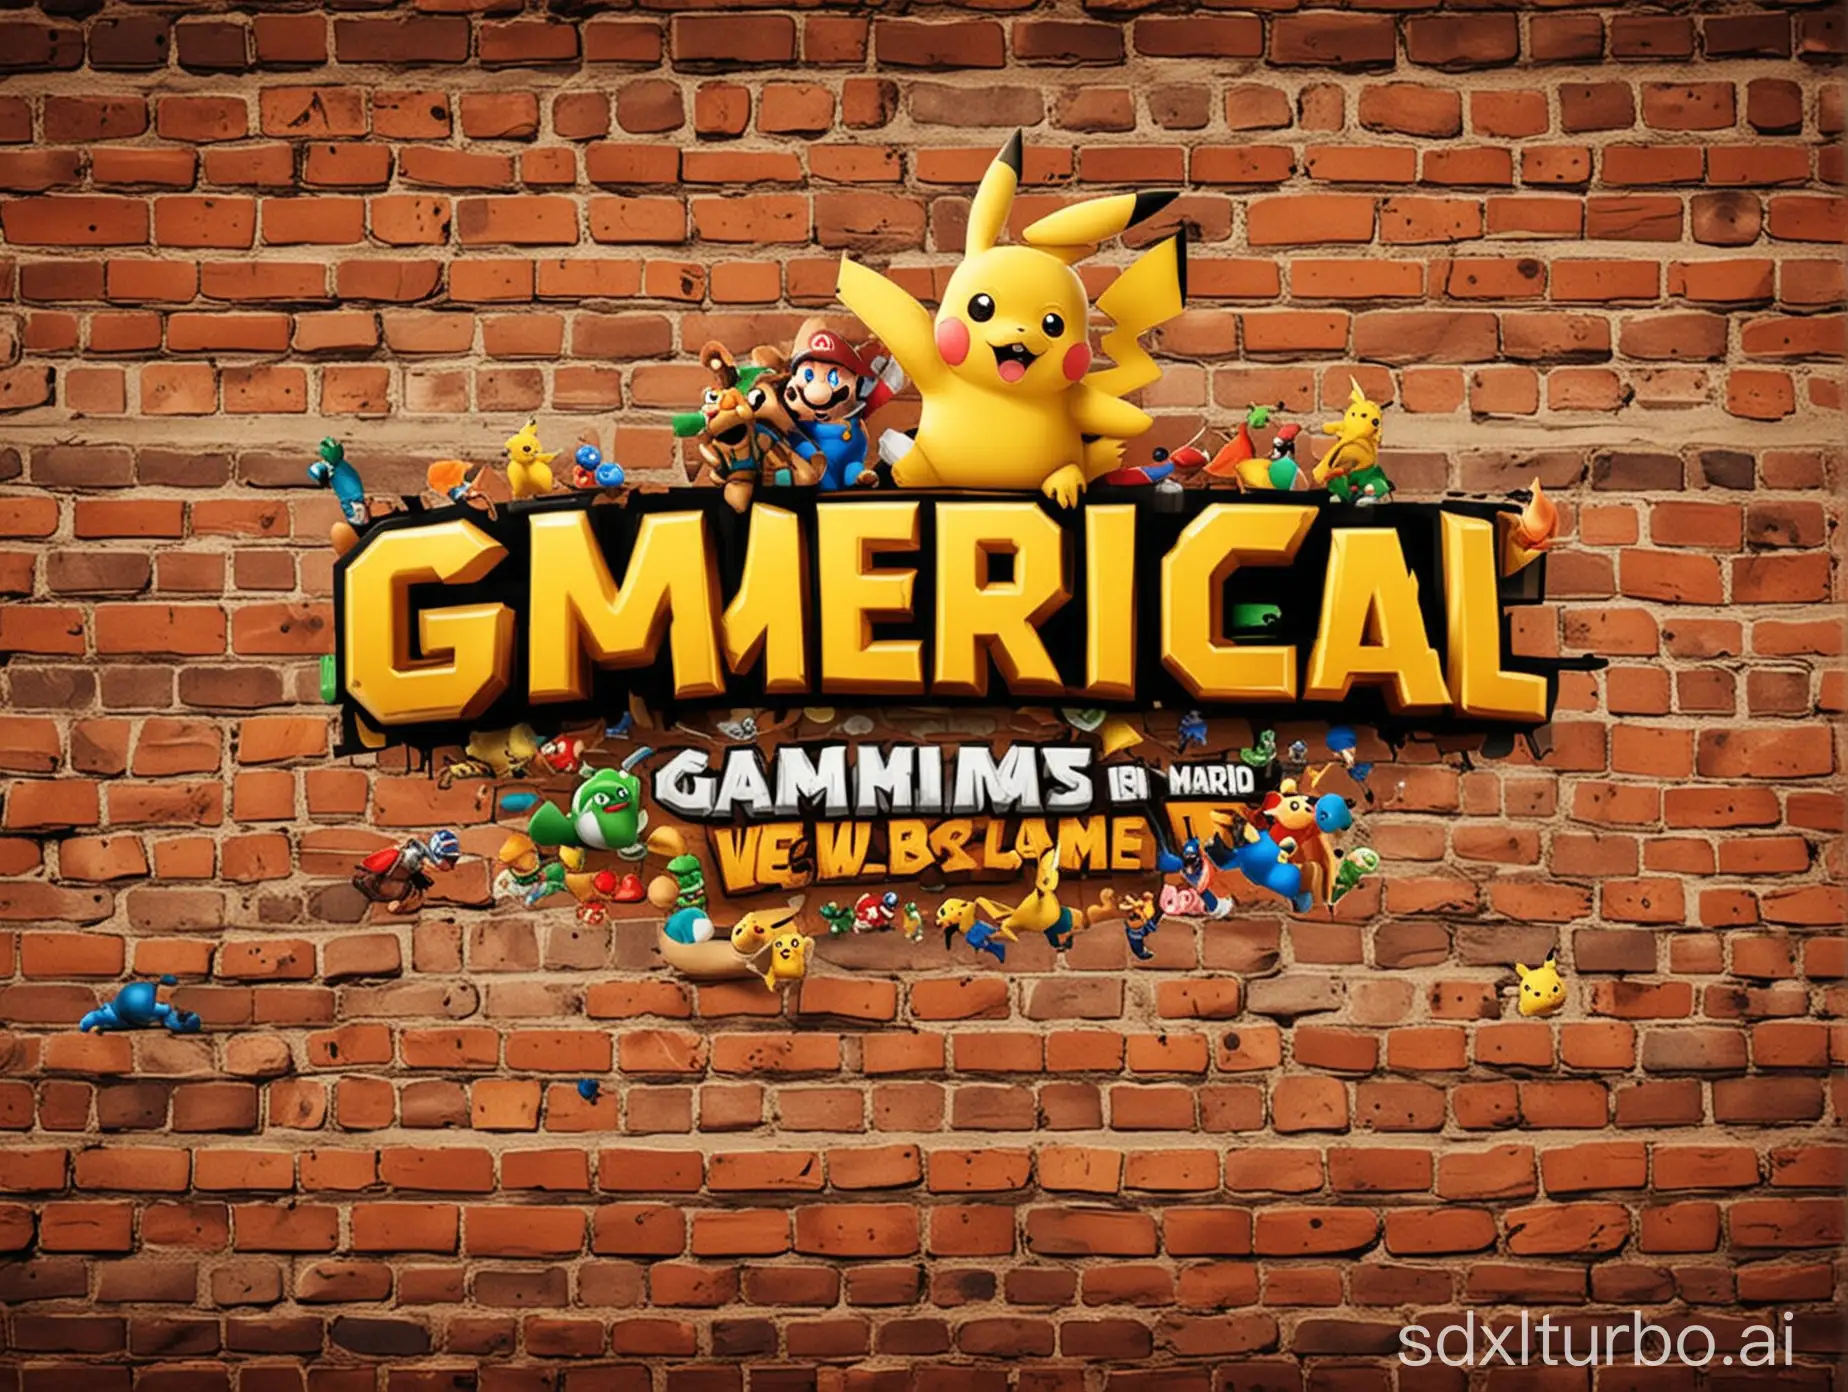 Produce a banner for the HTML5 gaming website, Gamerical, featuring popular characters like Super Mario, Pikachu, and Pacman. Craft an engaging scene where these iconic figures interact within a vibrant gaming environment, highlighting the diverse array of games available on the platform. Ensure the text reads 'Gamerical' without any variations to maintain consistency across all generated banners.